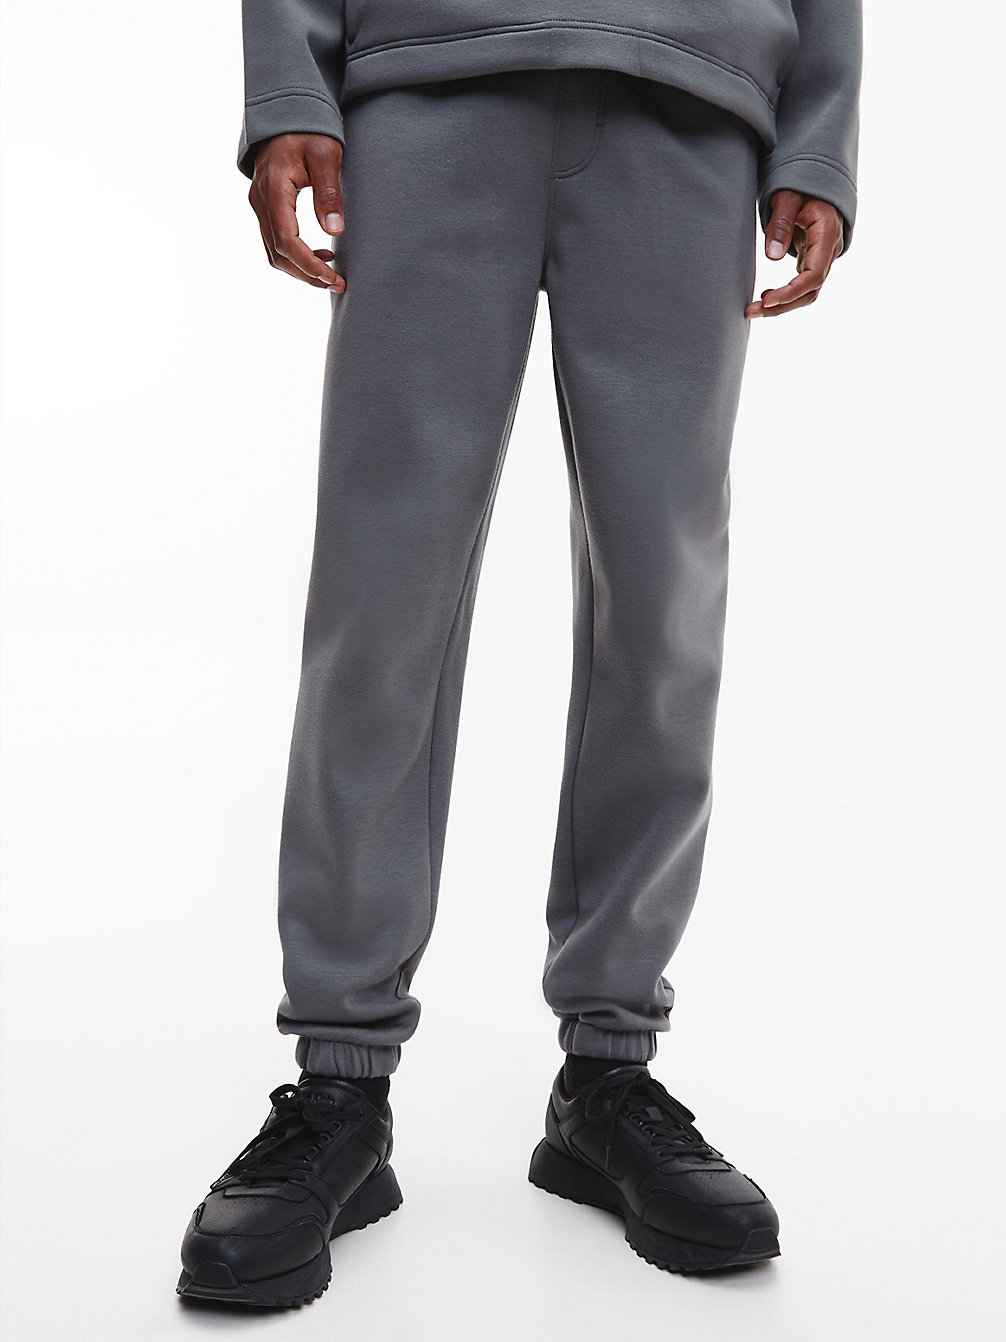 MEDIUM CHARCOAL Relaxed Spacer Knit Joggers undefined men Calvin Klein